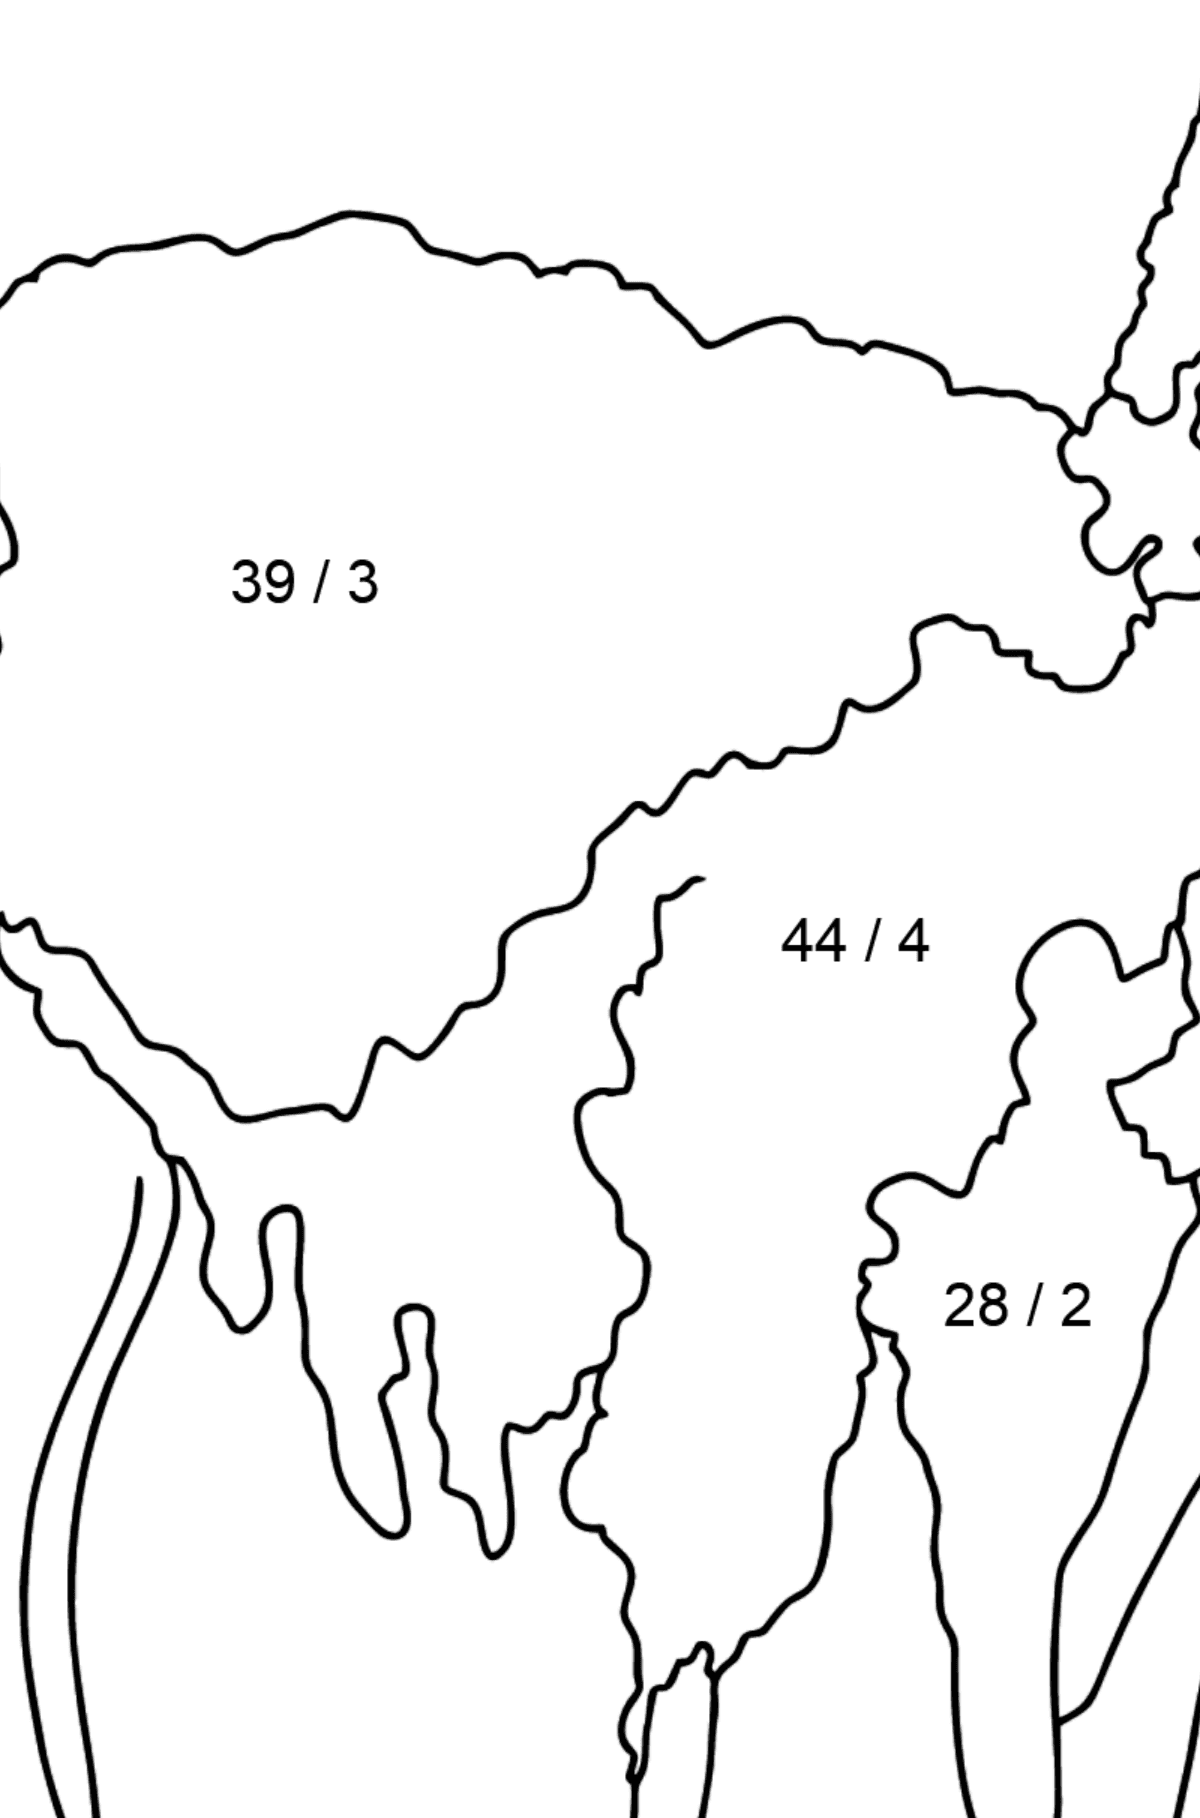 Coloring Page - A Lama is Inspecting the Area - Math Coloring - Division for Kids